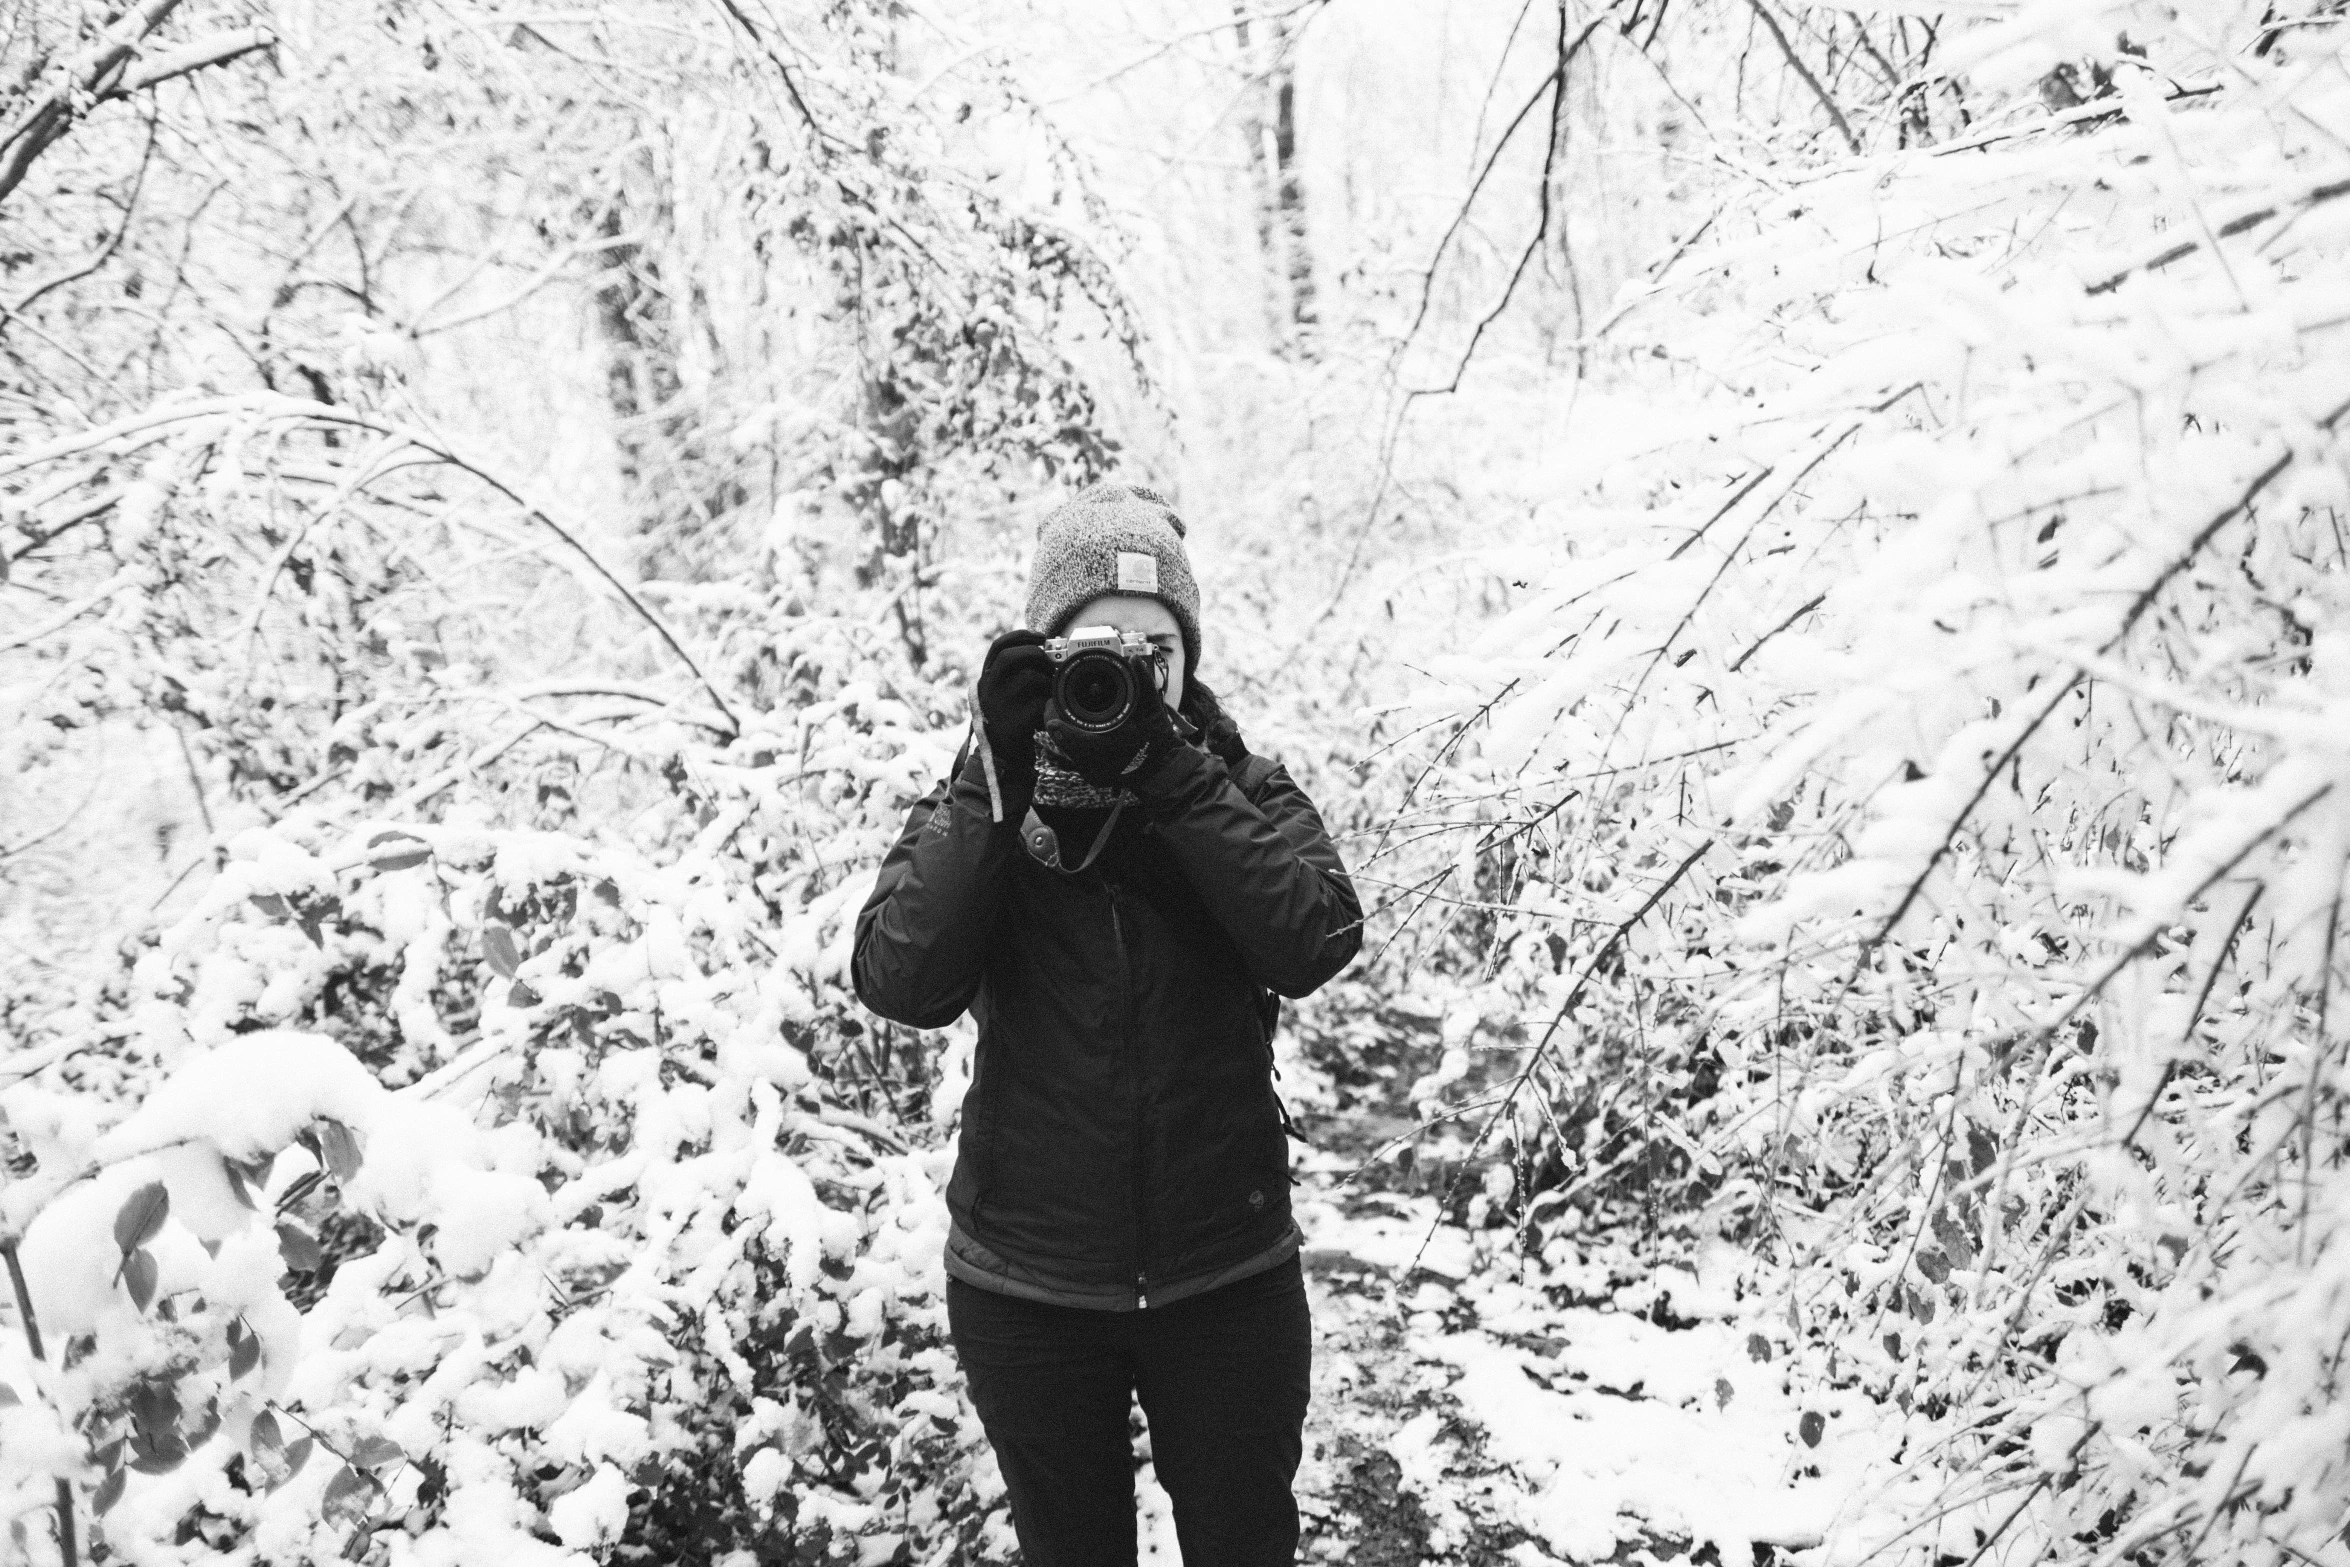 the person is taking a picture with his camera in a snowy forest